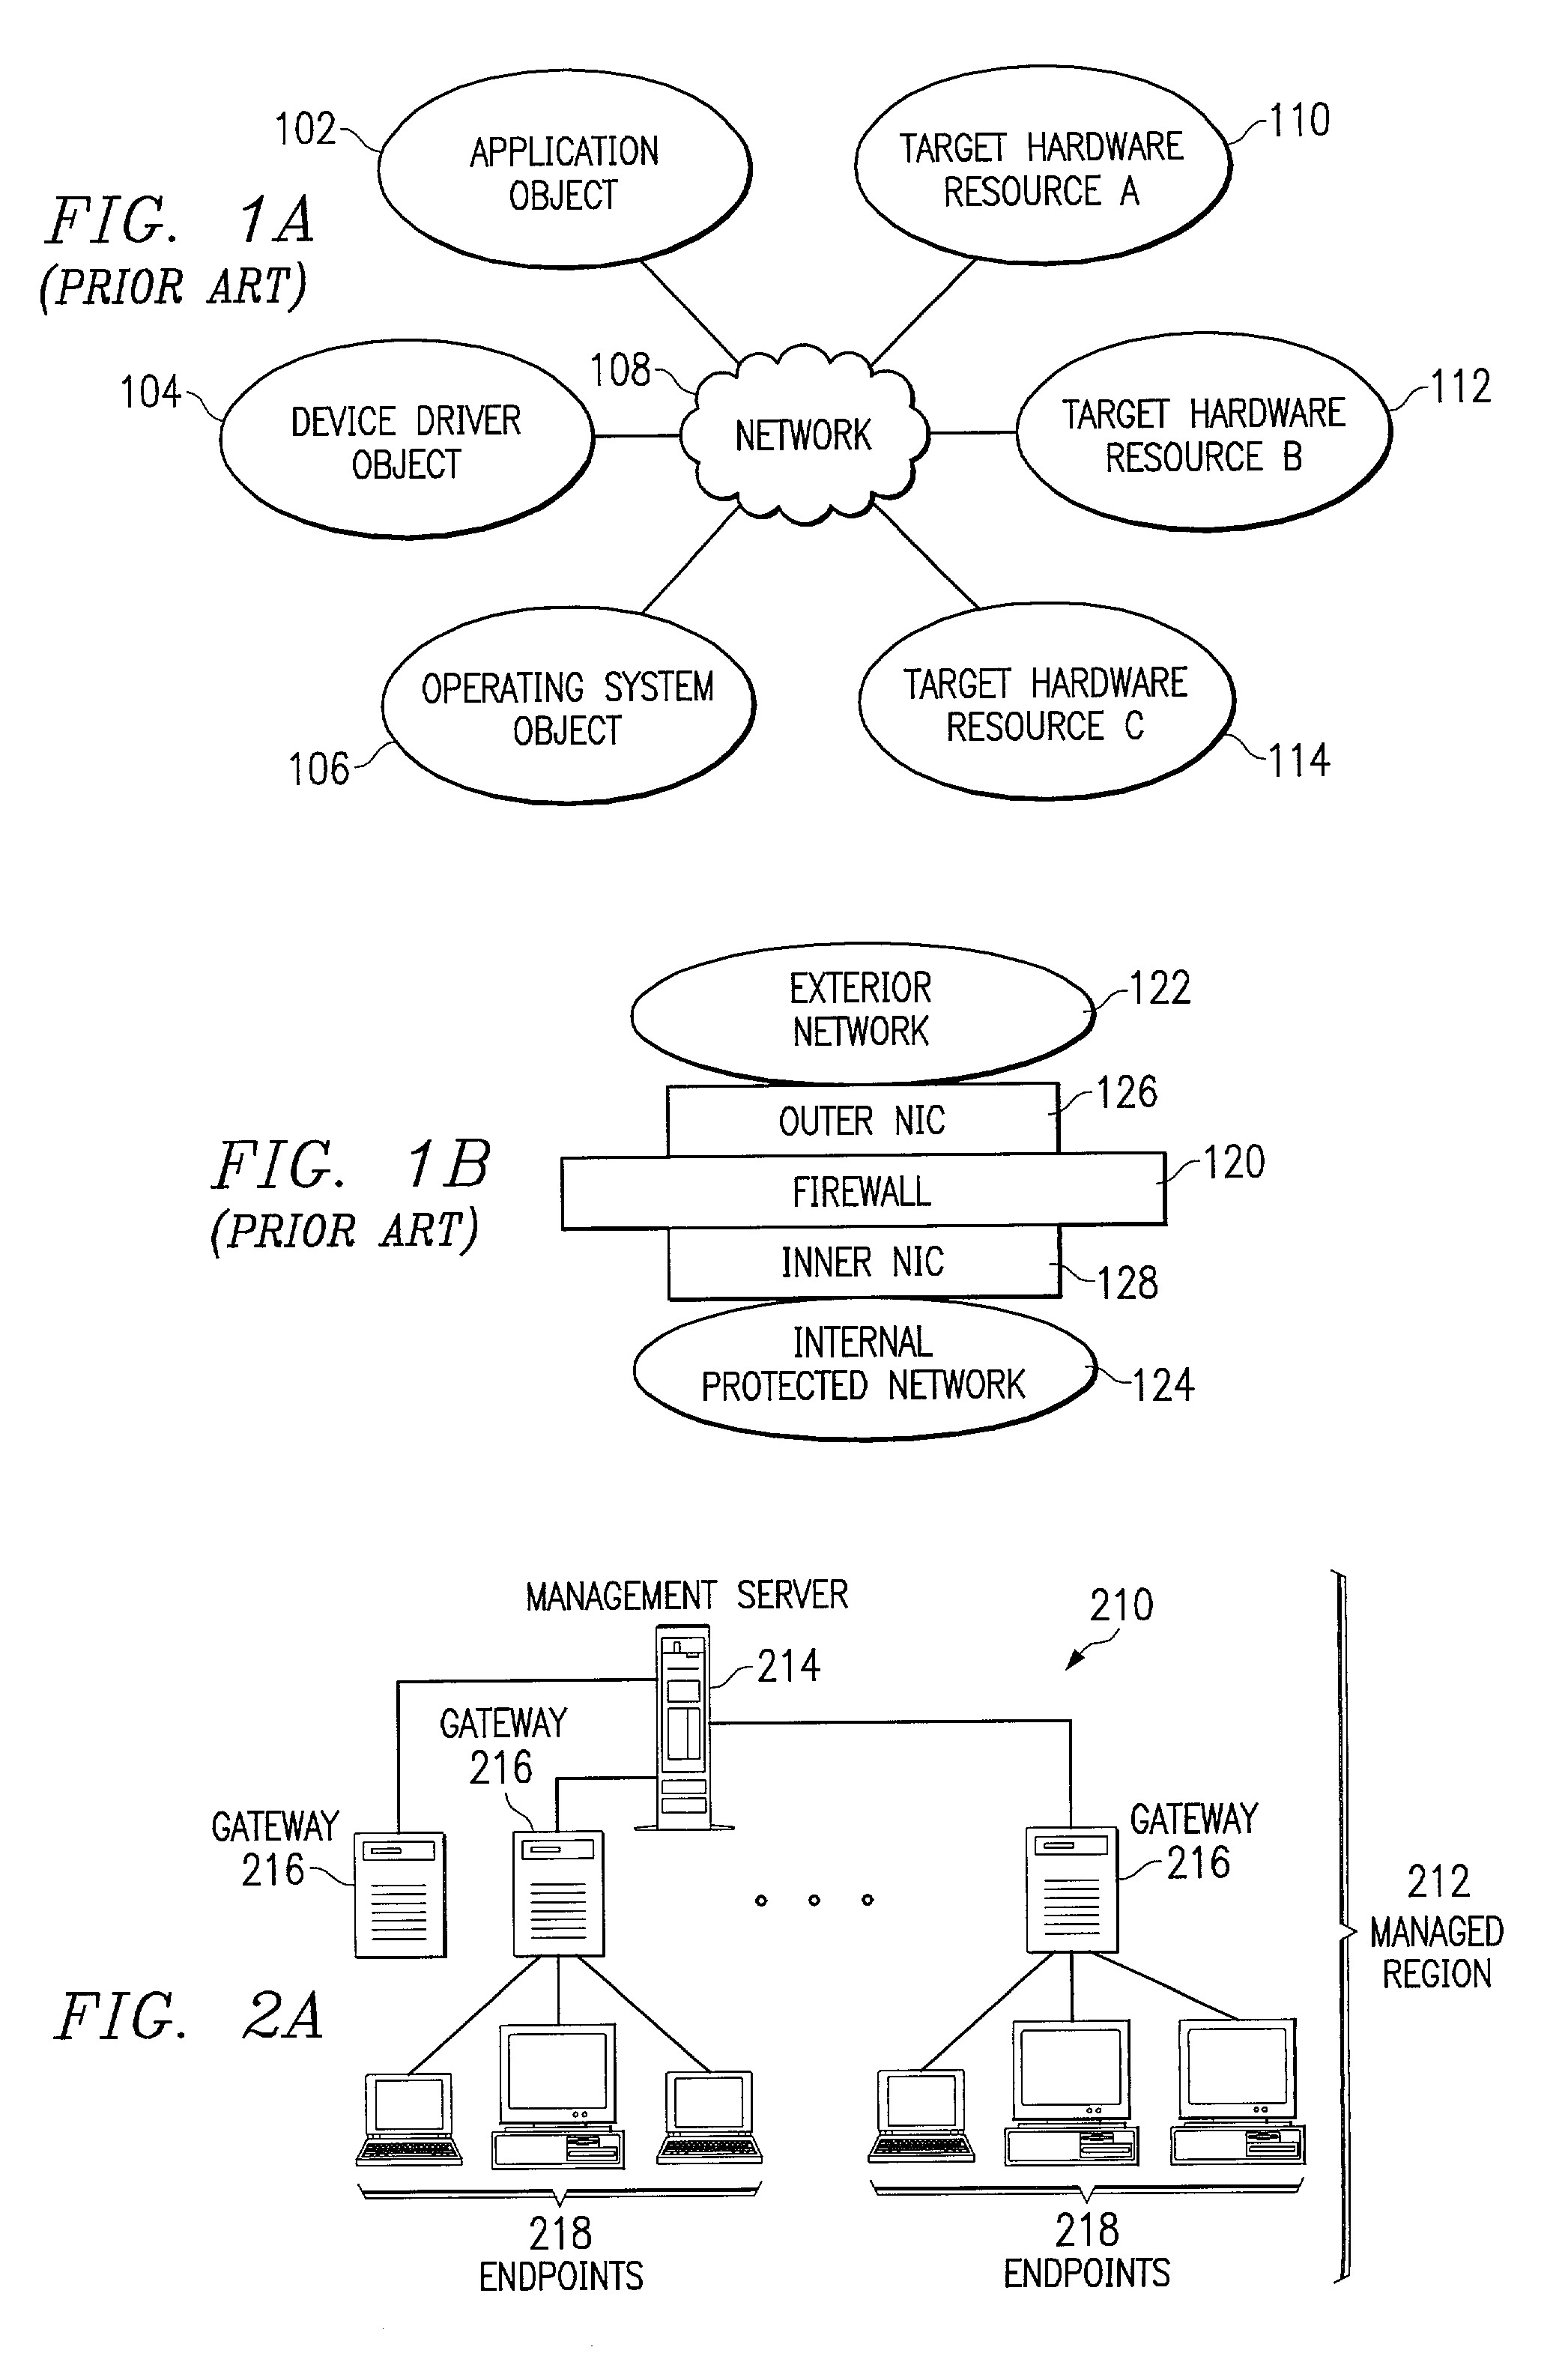 Method and apparatus in an application framework system for providing a port and network hardware resource firewall for distributed applications